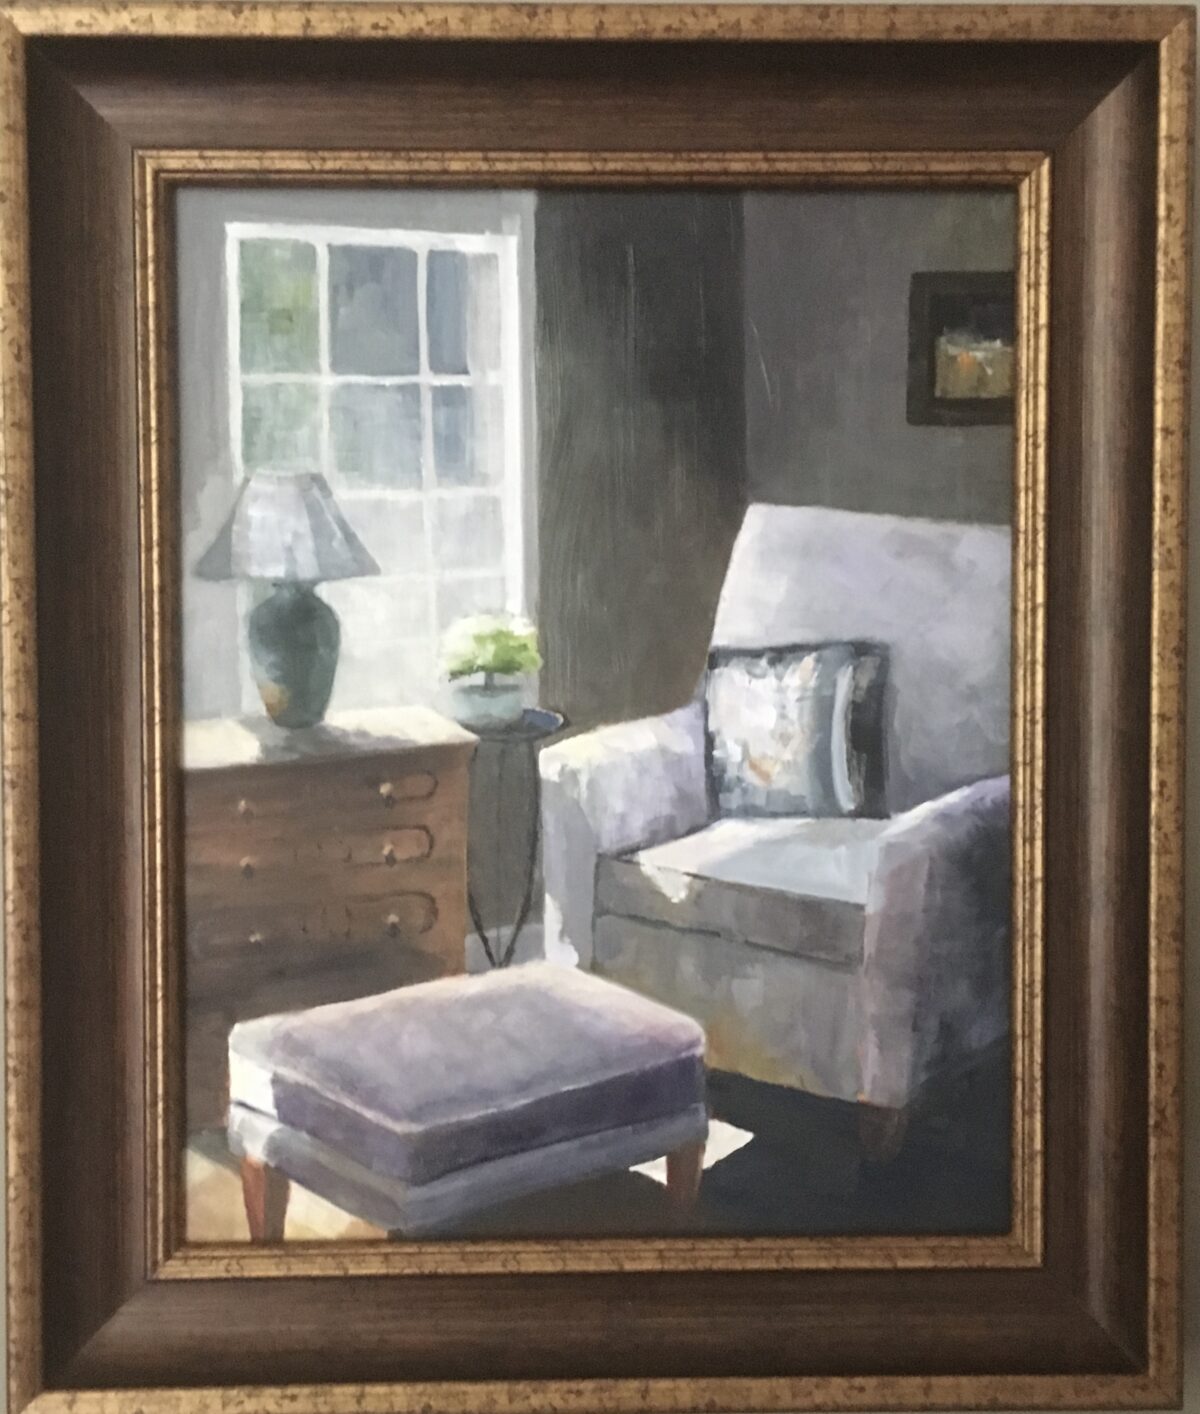 154 - The Reading Chair - 20 x 16 - Still Life - Not Available - $525